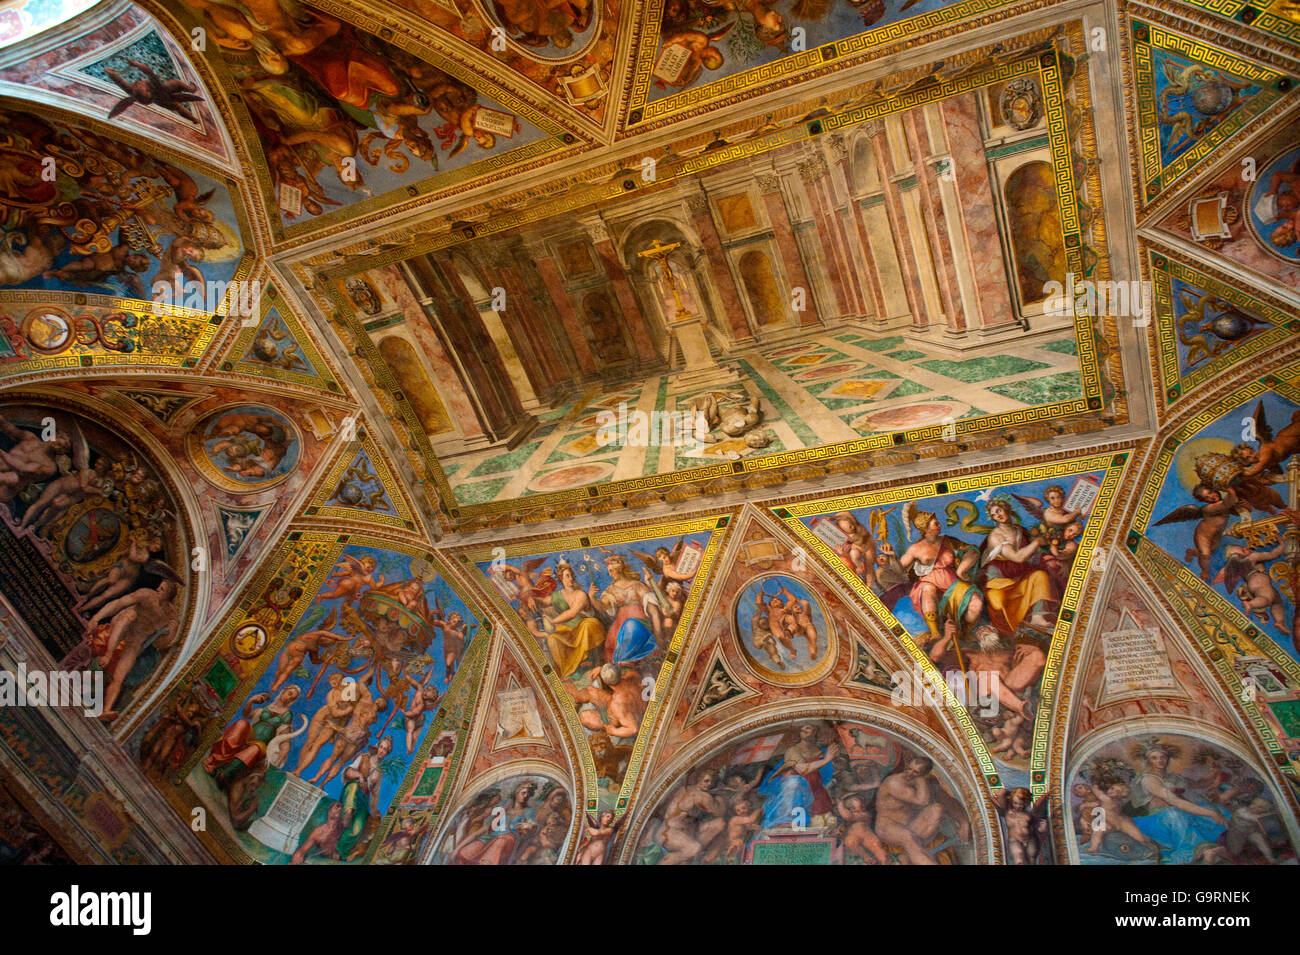 Ceiling Painting Triumph Of Christian Religion By Raphael